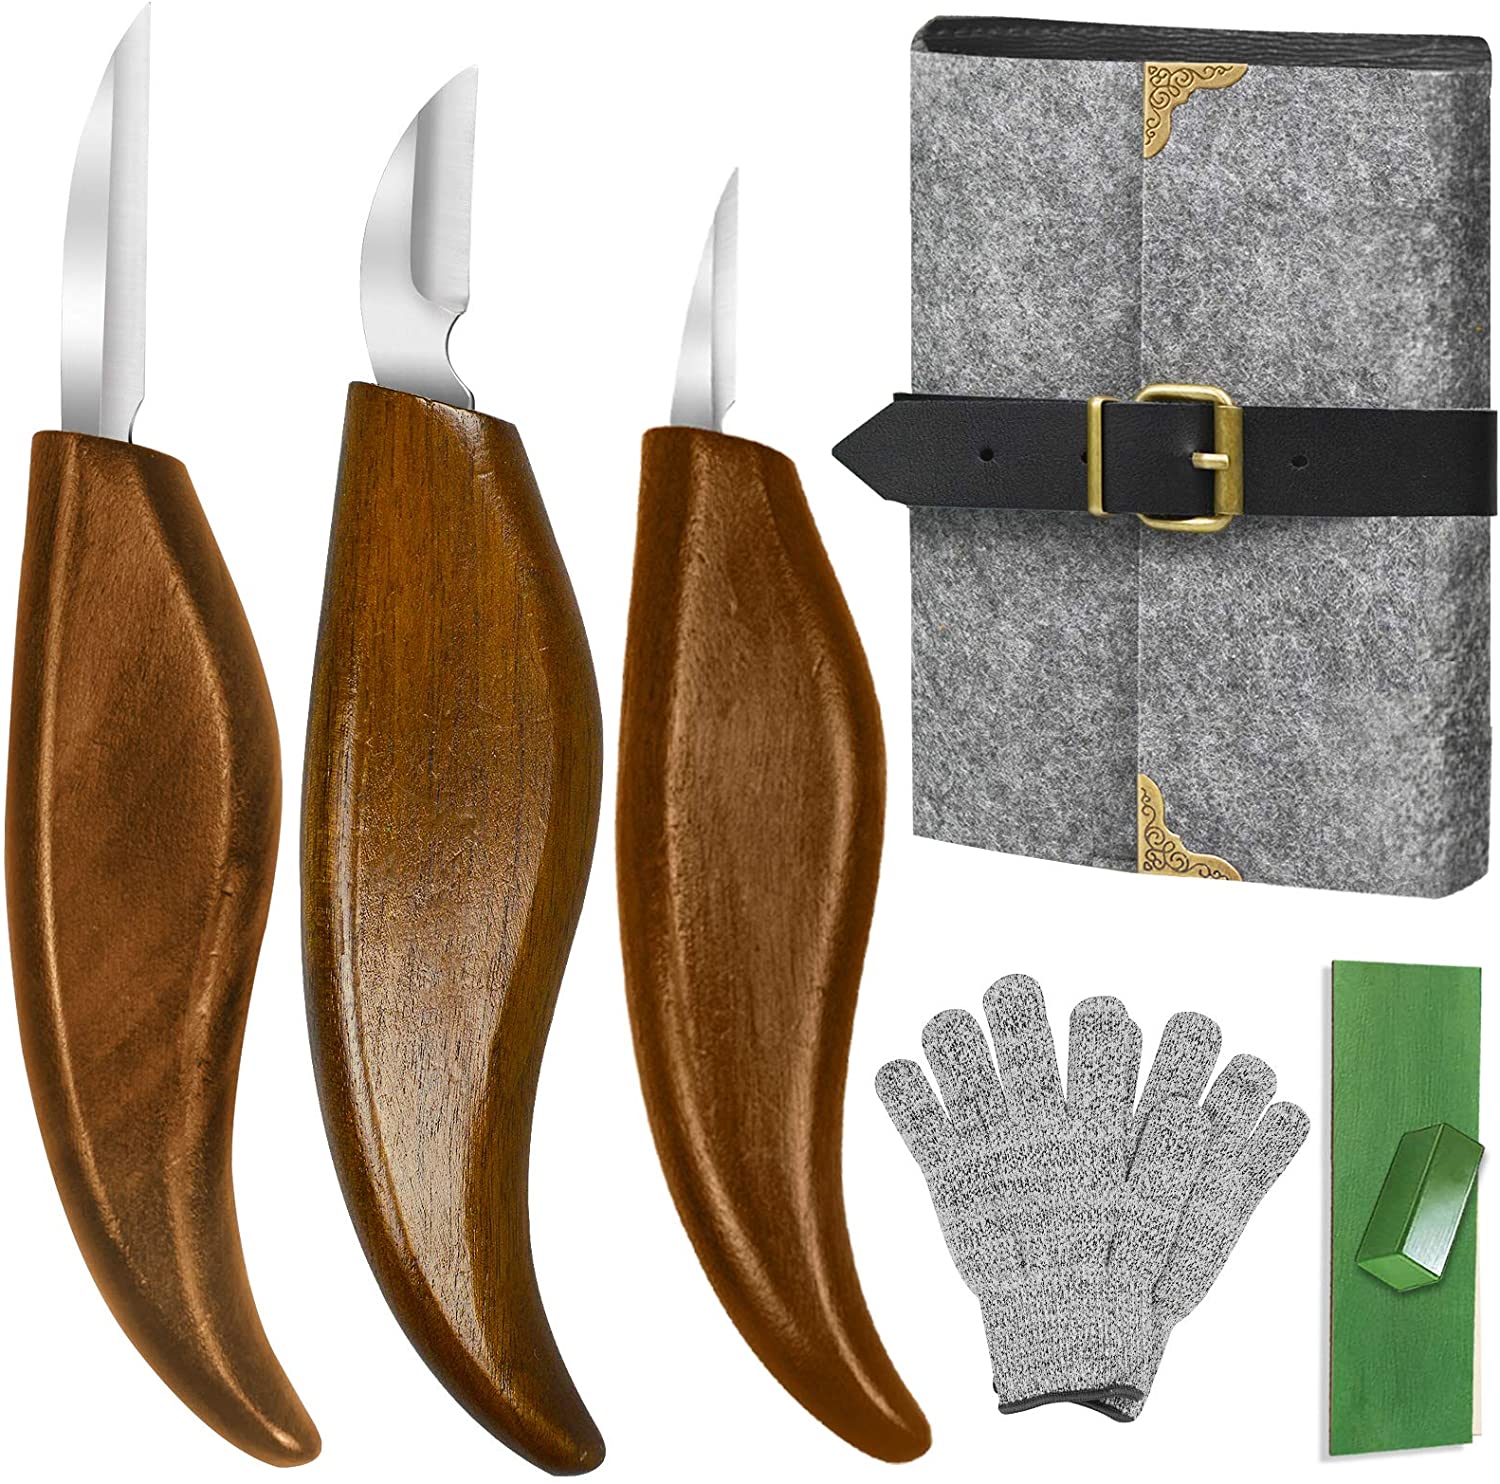 WAYCOM Wood Carving Whittling Knives Set with Deluxe Felt Leather Case